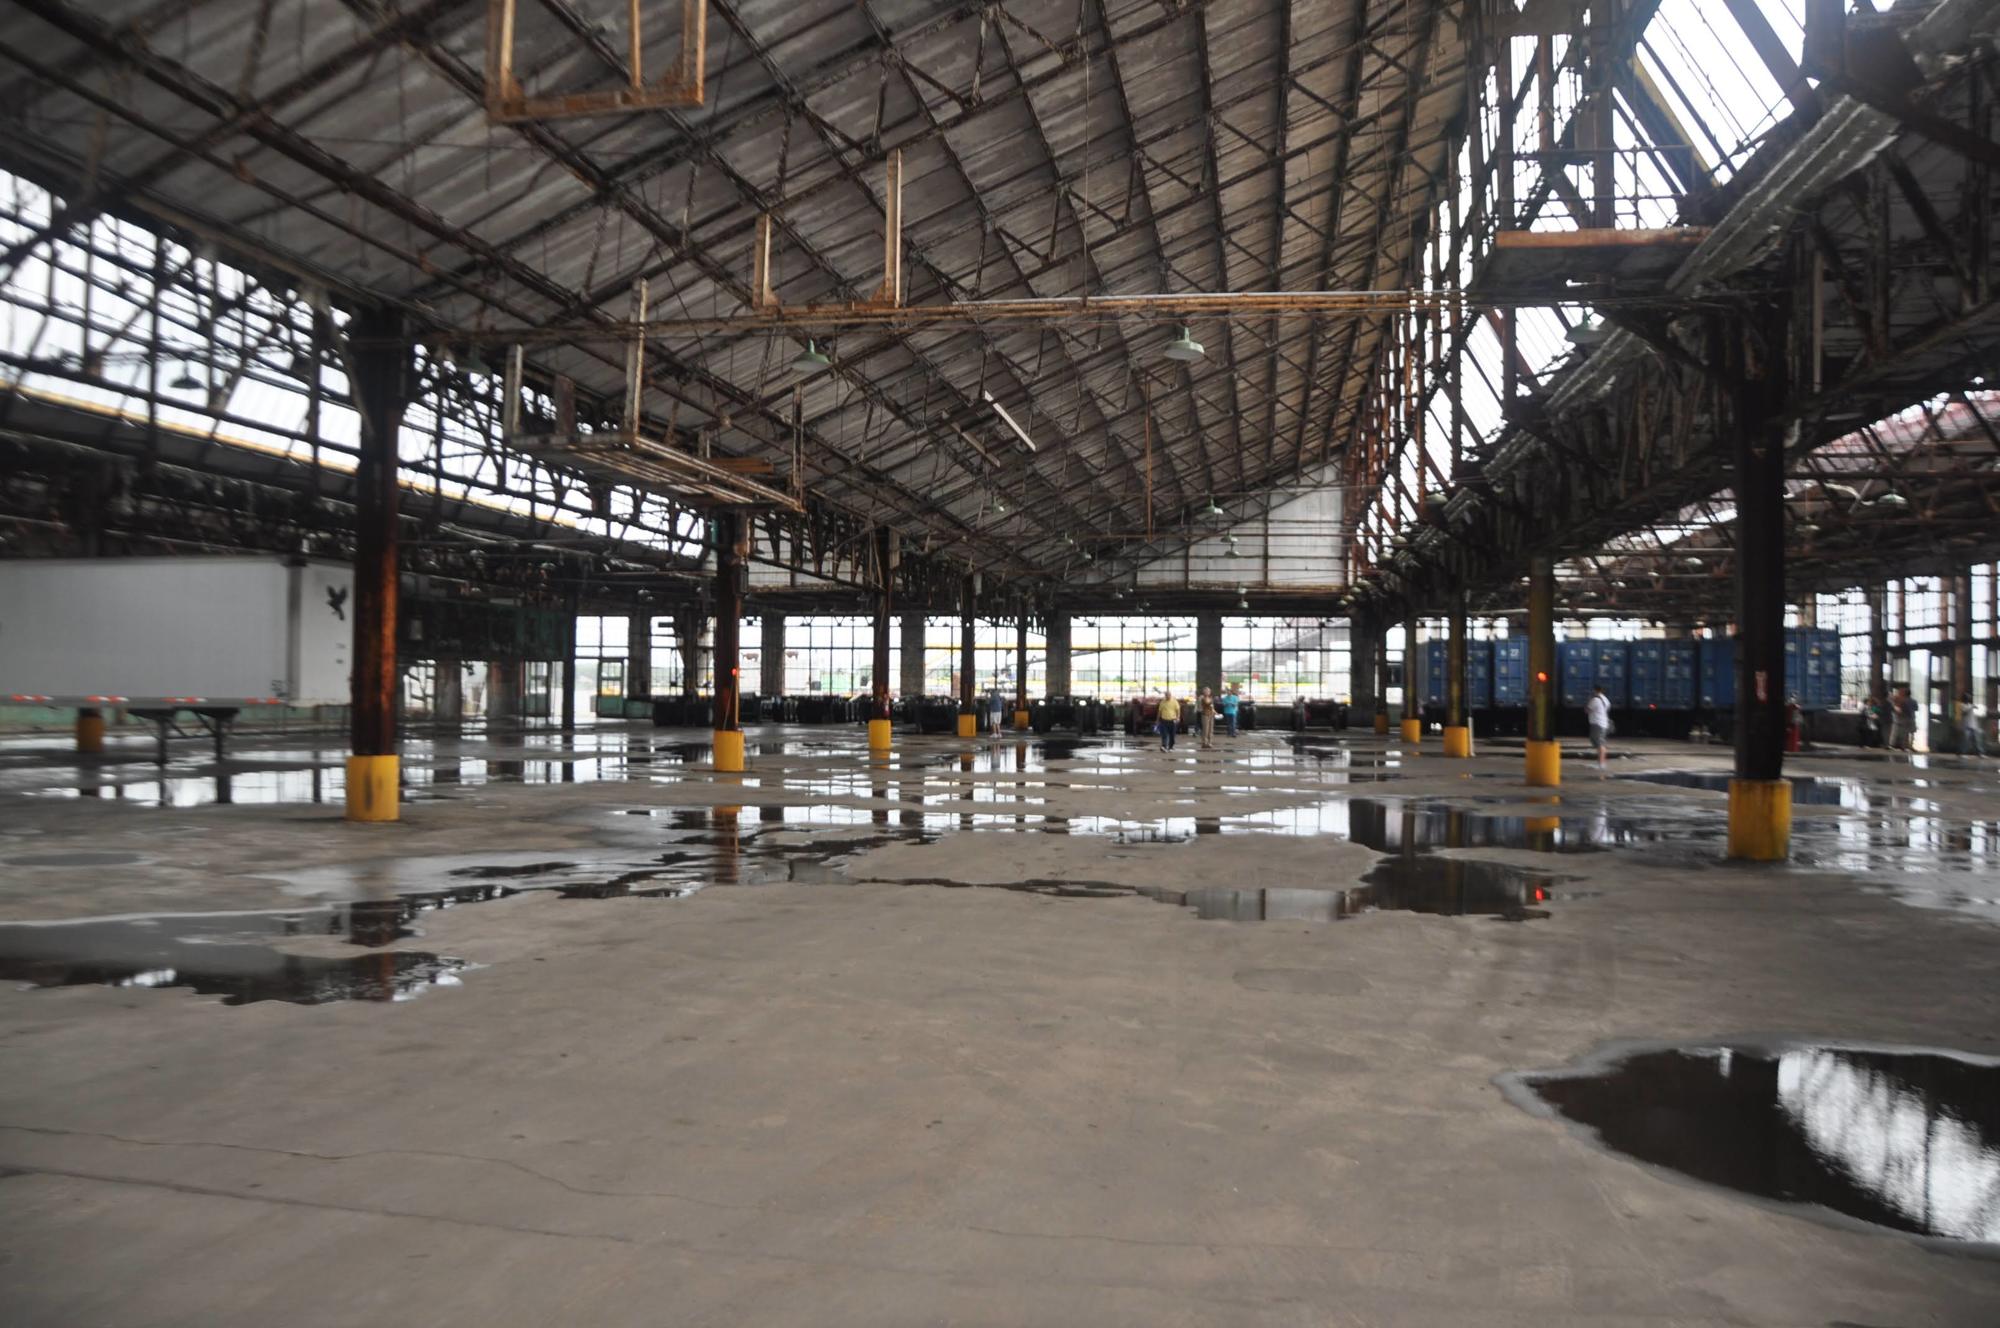 Inside the former Ford Motor Co. factory.